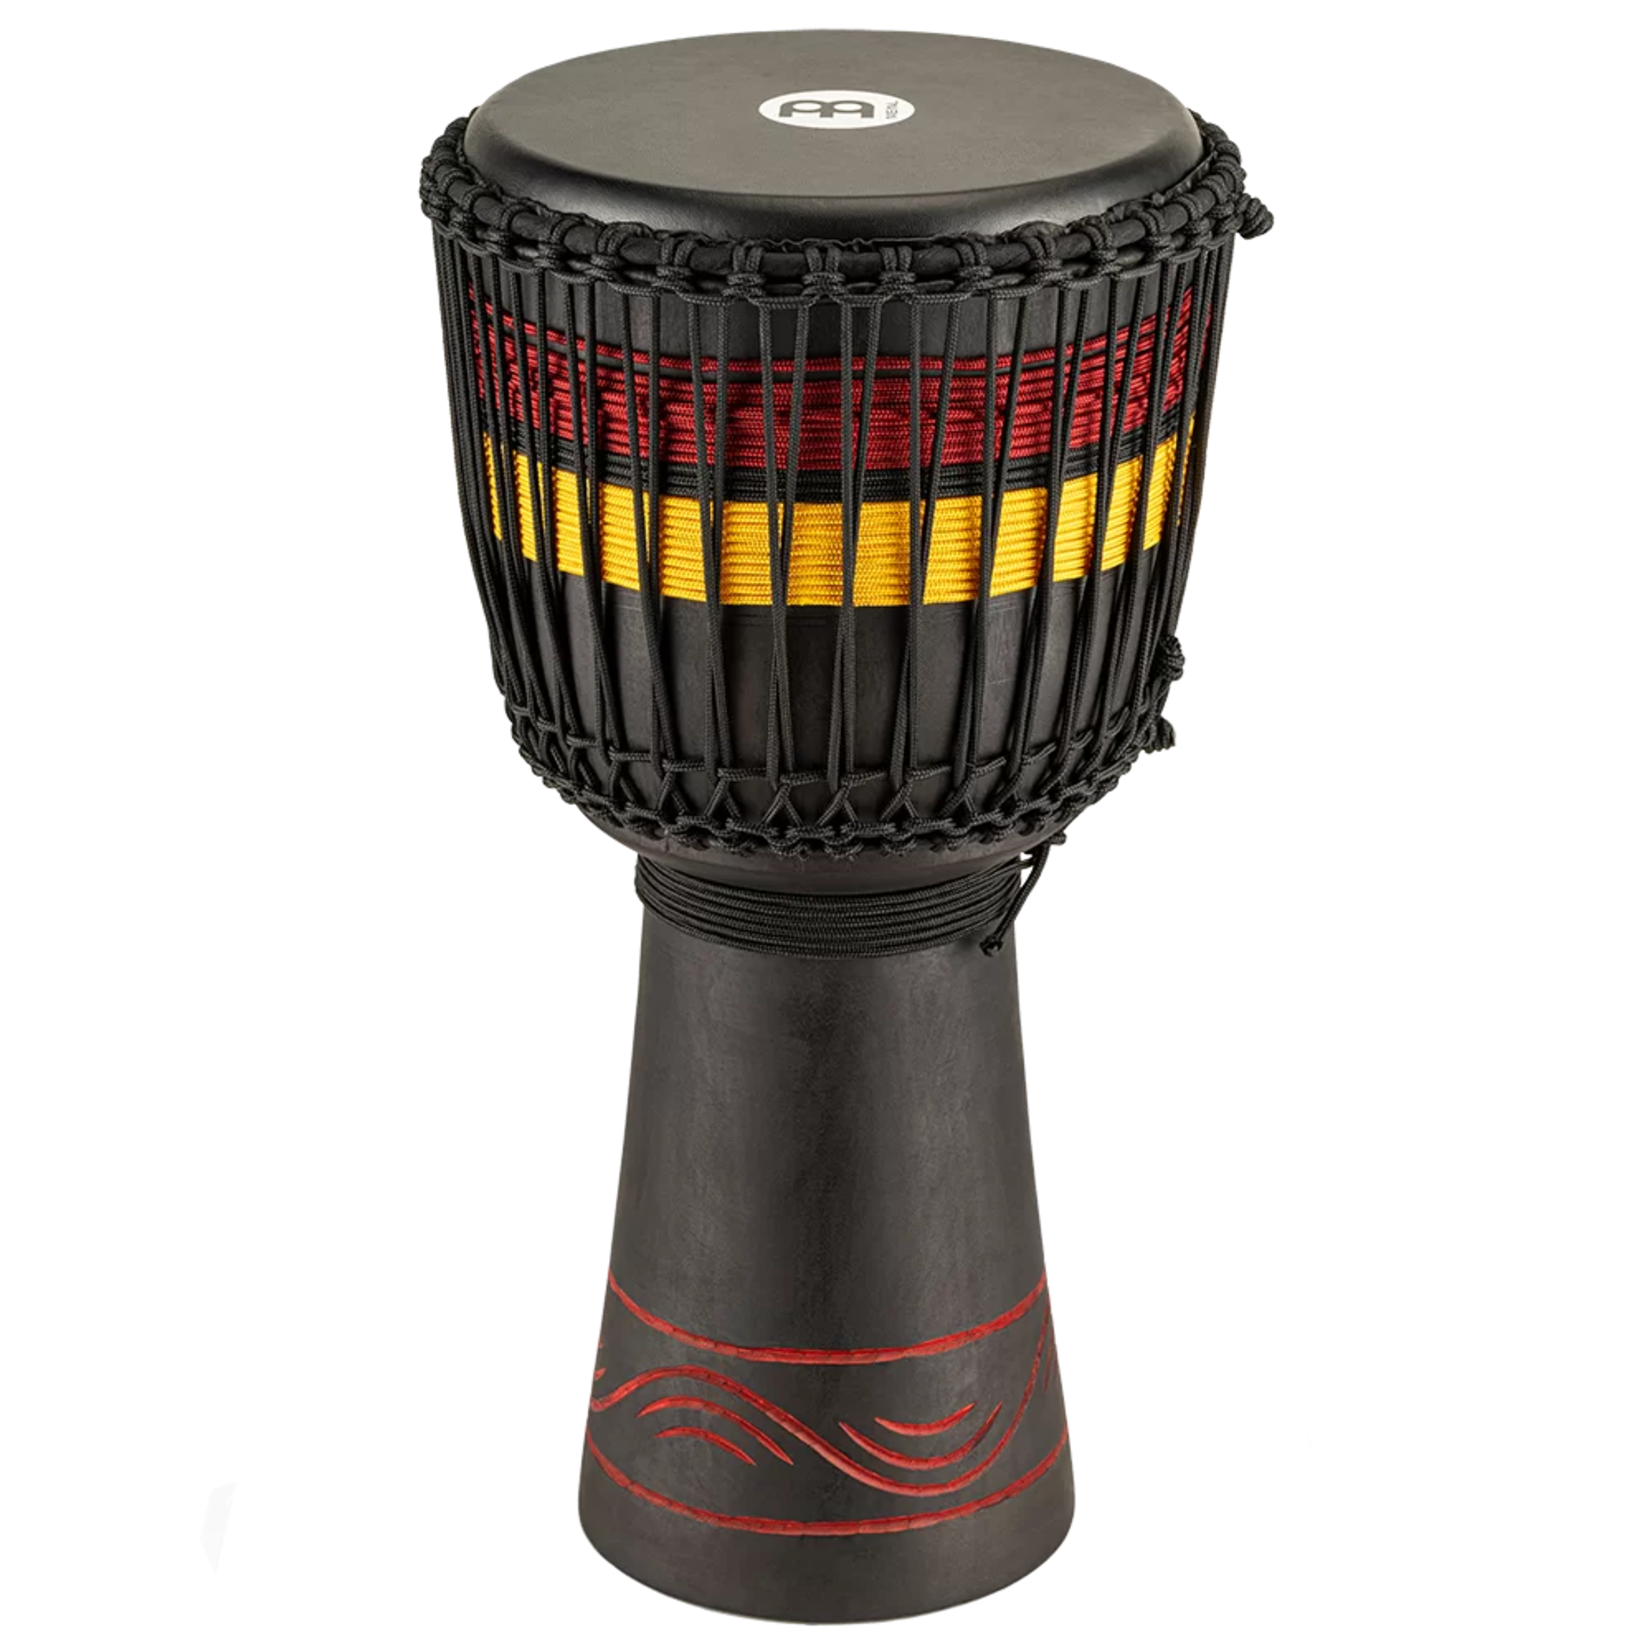 Meinl Meinl 12" Original African Style Rope Tuned Djembe (Black With Red/Yellow Ropes) ADJ7-L